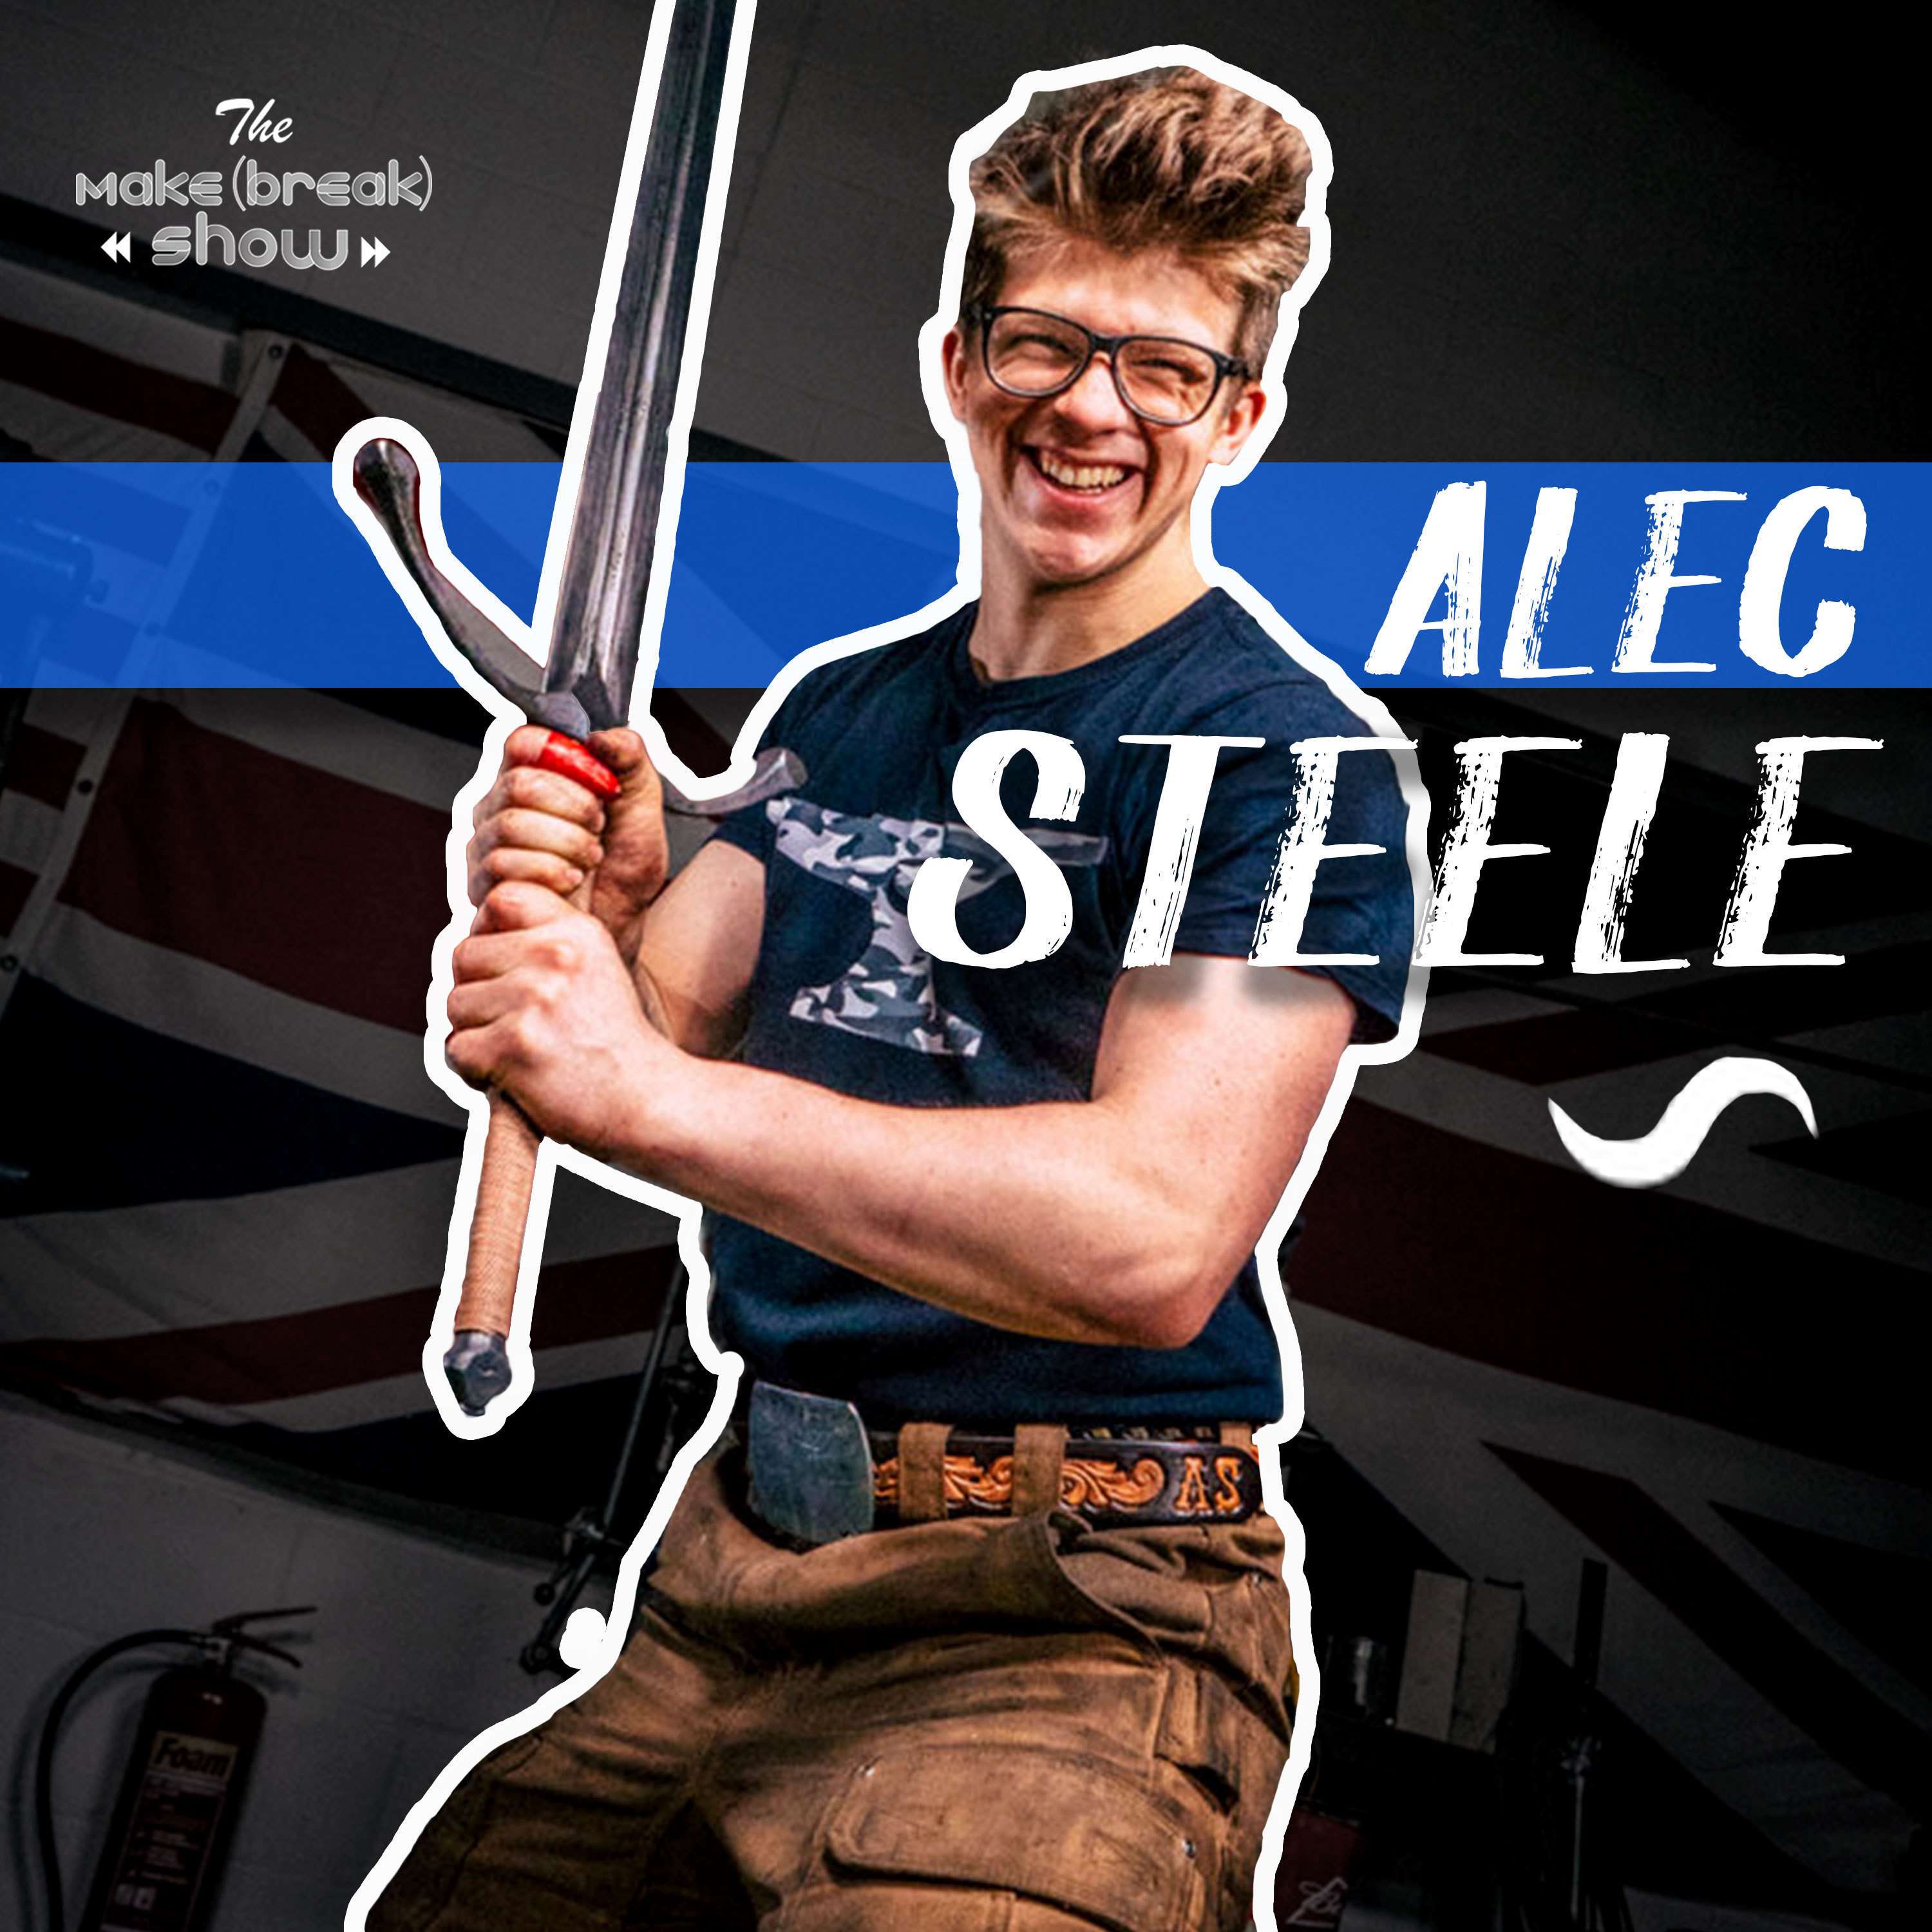 045: Forged in Steel with Alec Steele